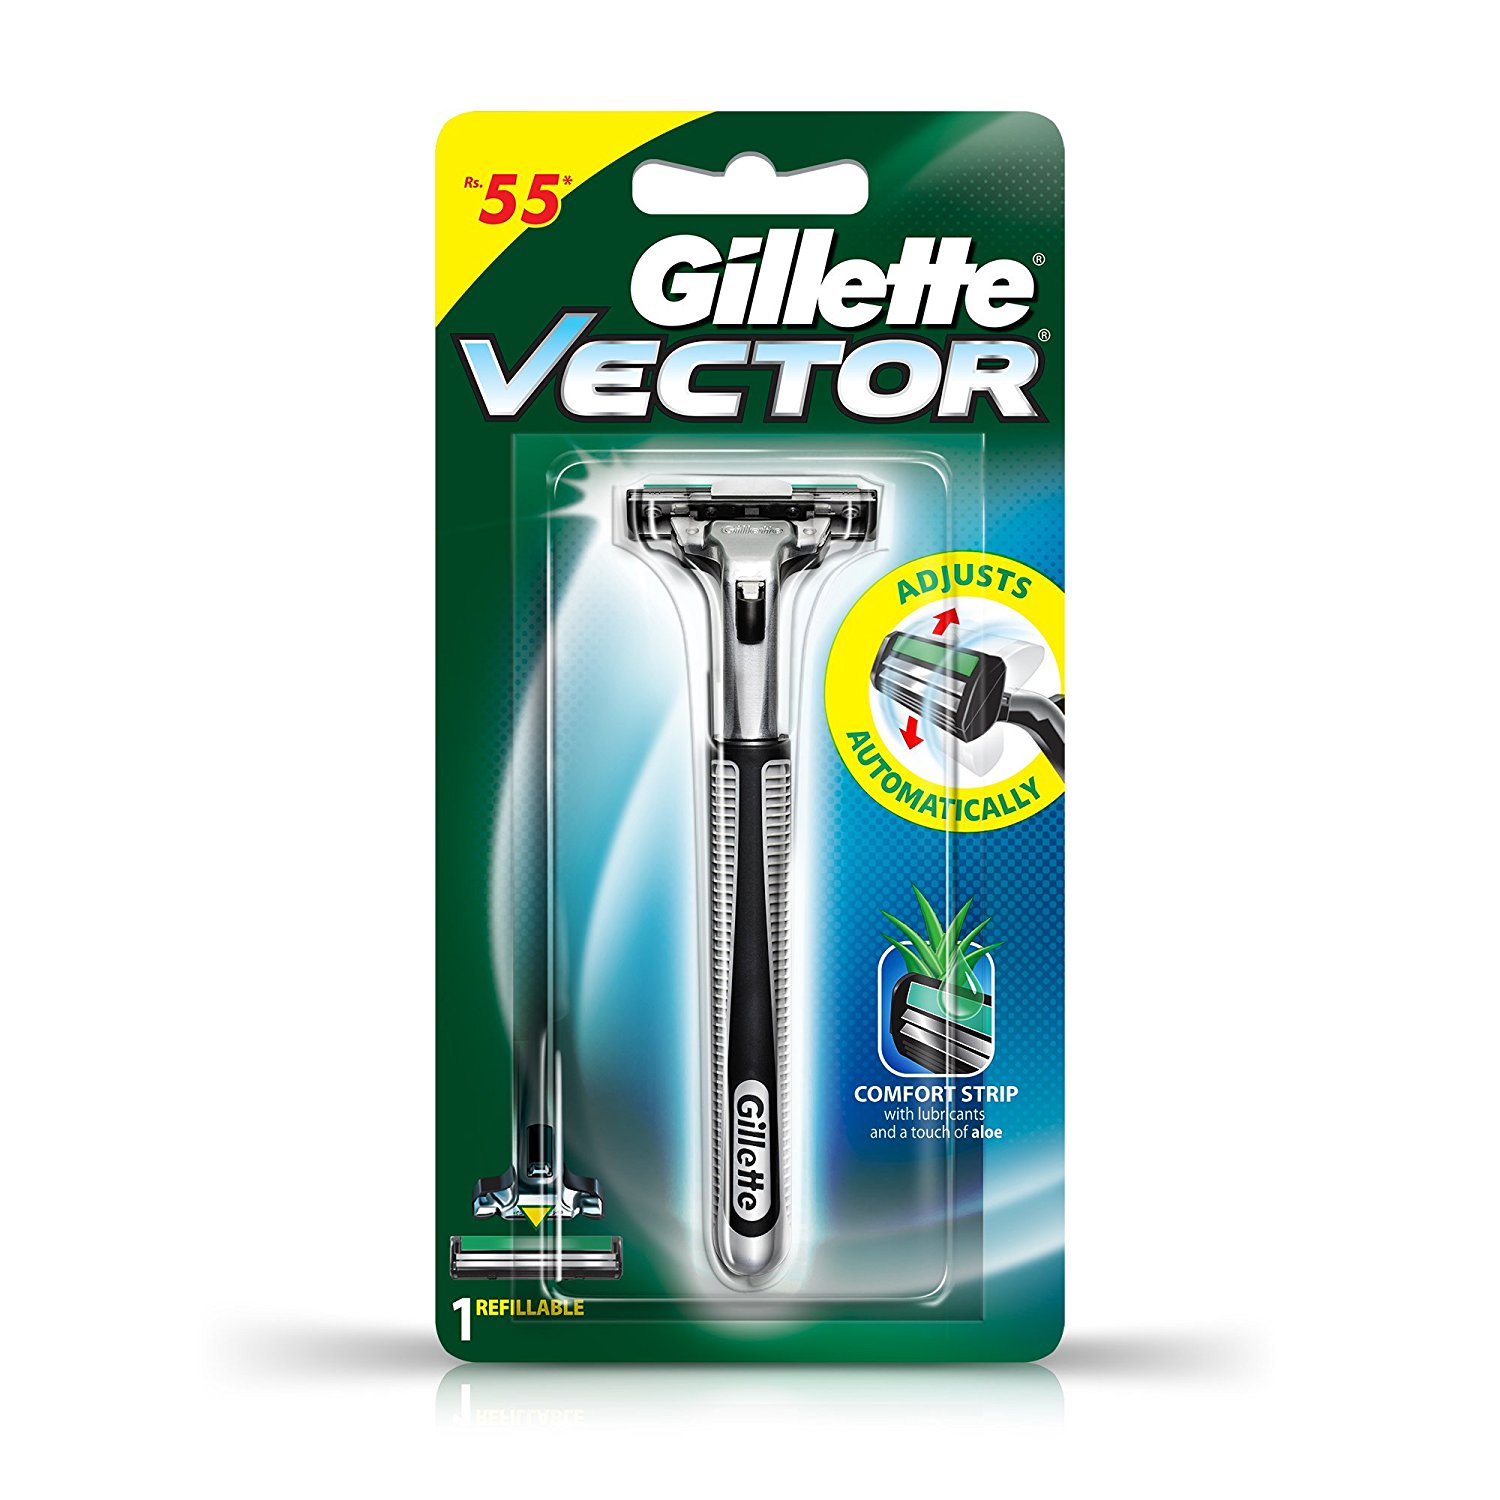 Gillette Vector Photos Image And Wallpaper Mouthshut